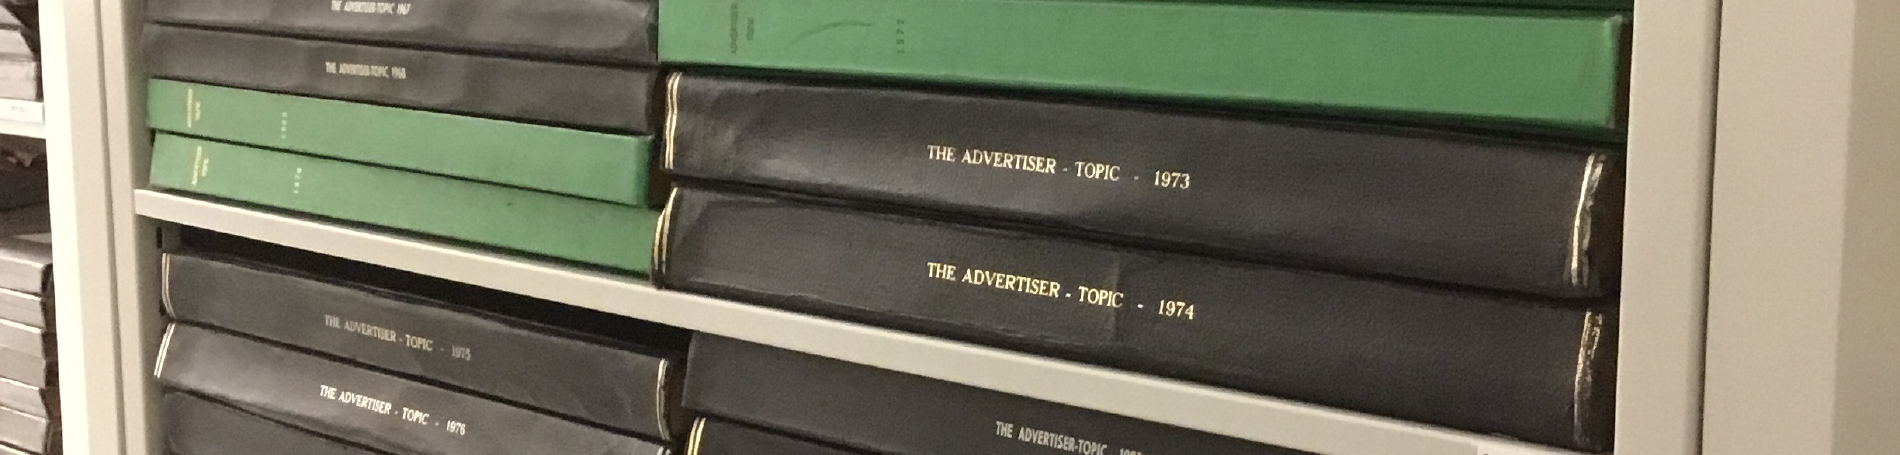 Archives material on a shelf. 